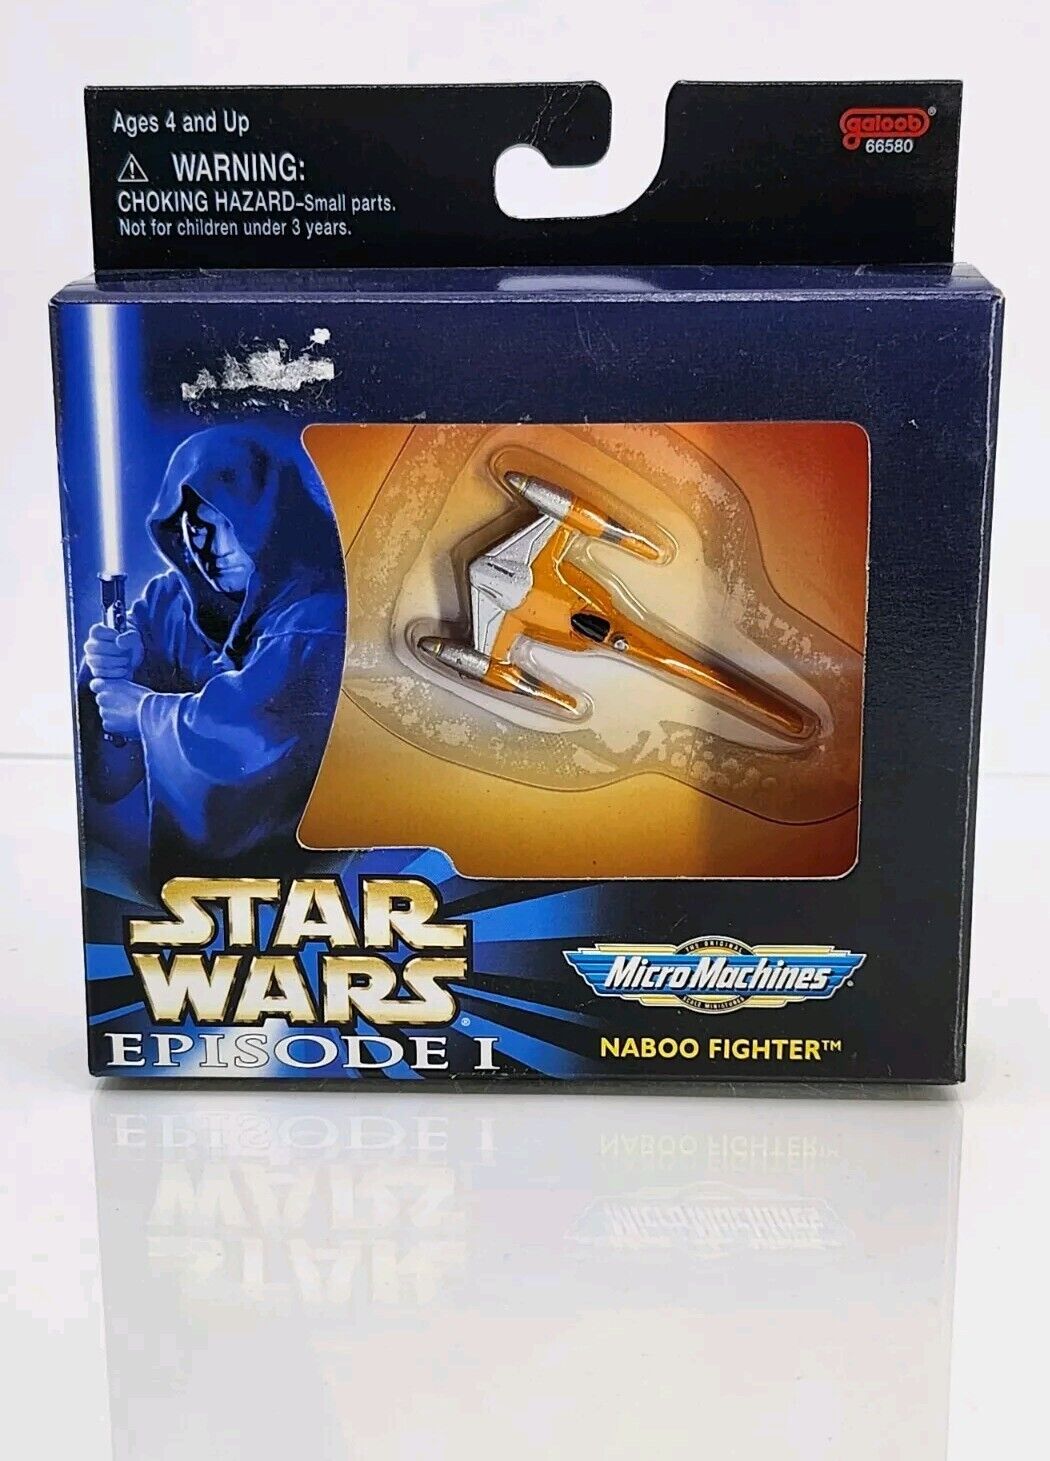 Star Wars® Episode I  Naboo Fighter™ Micro Machines galoob® Item #66580